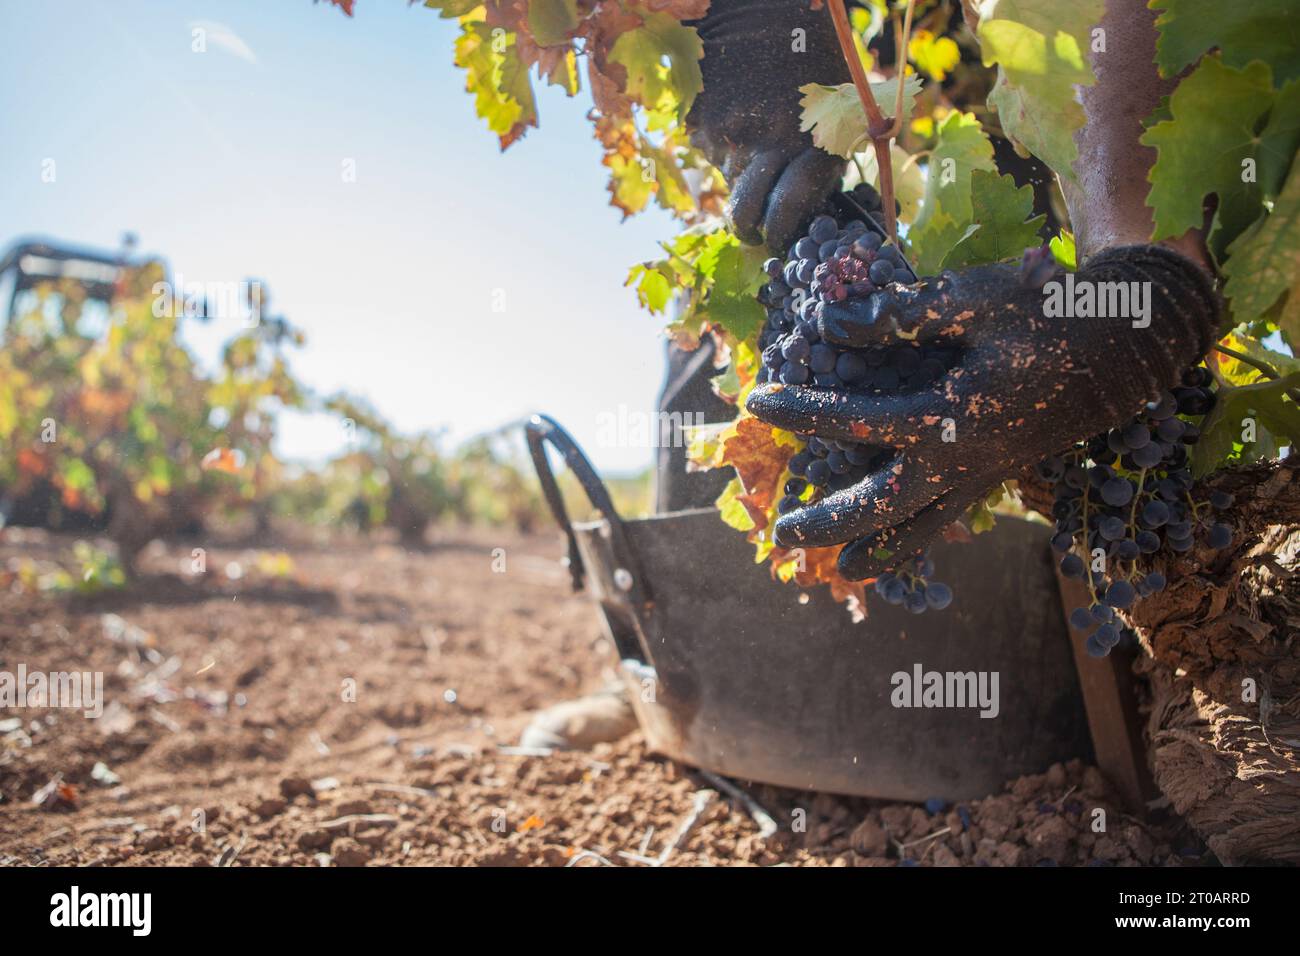 Grape picker quickly cutting bunches. Motion blurred photo Stock Photo